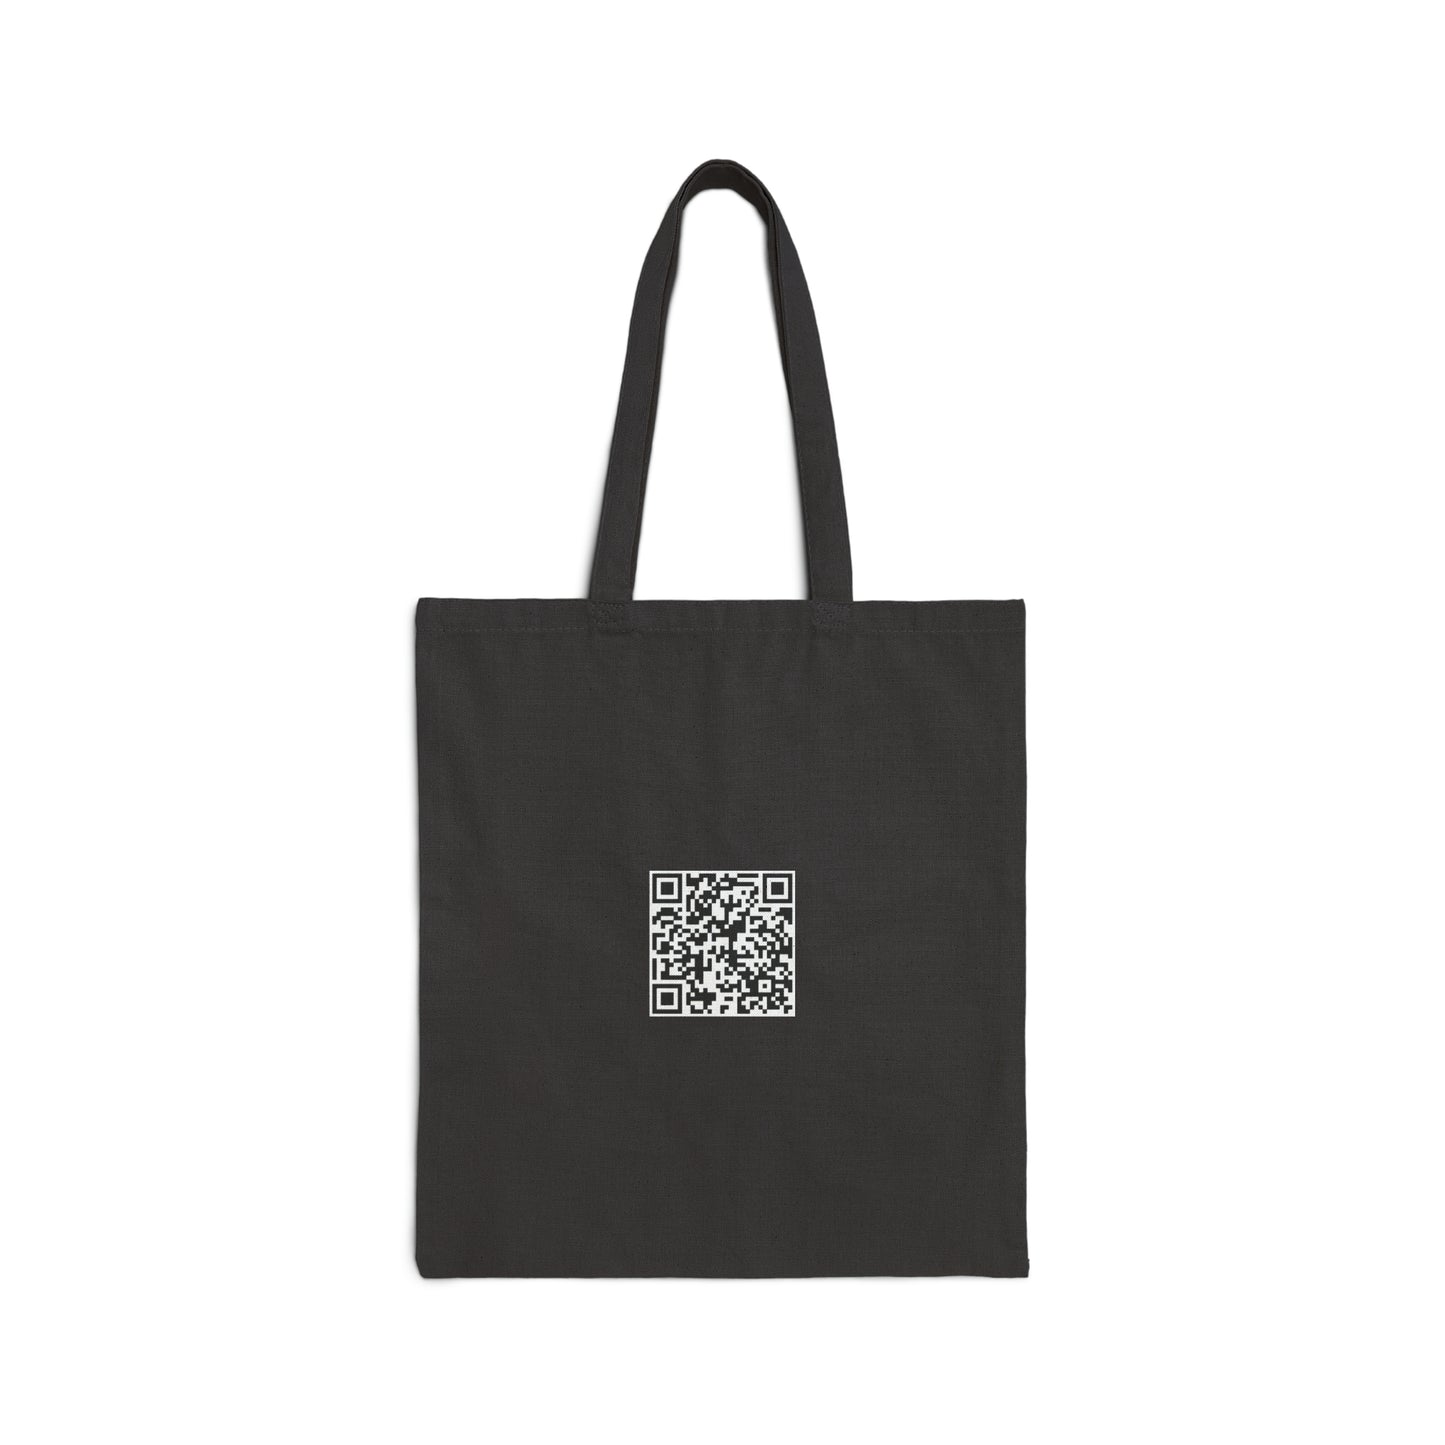 Murder By Moonlight - Cotton Canvas Tote Bag